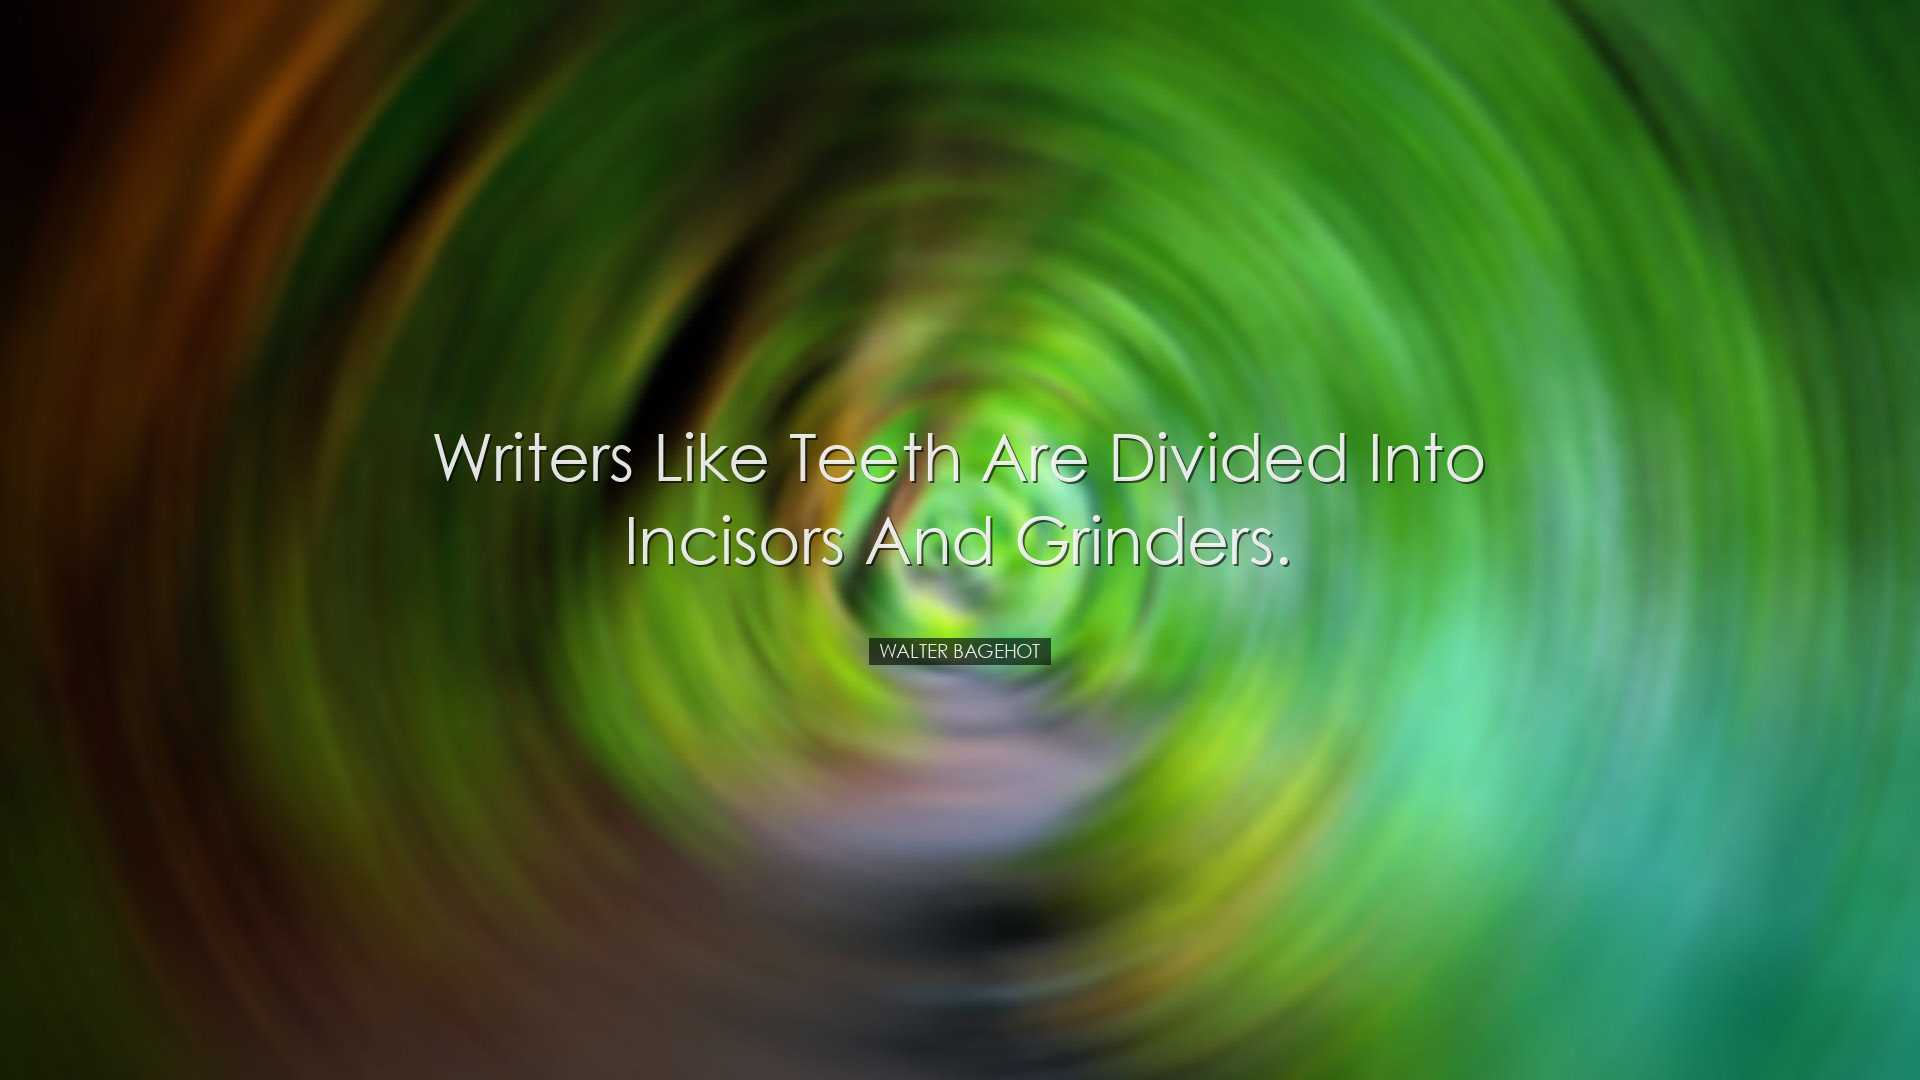 Writers like teeth are divided into incisors and grinders. - Walte